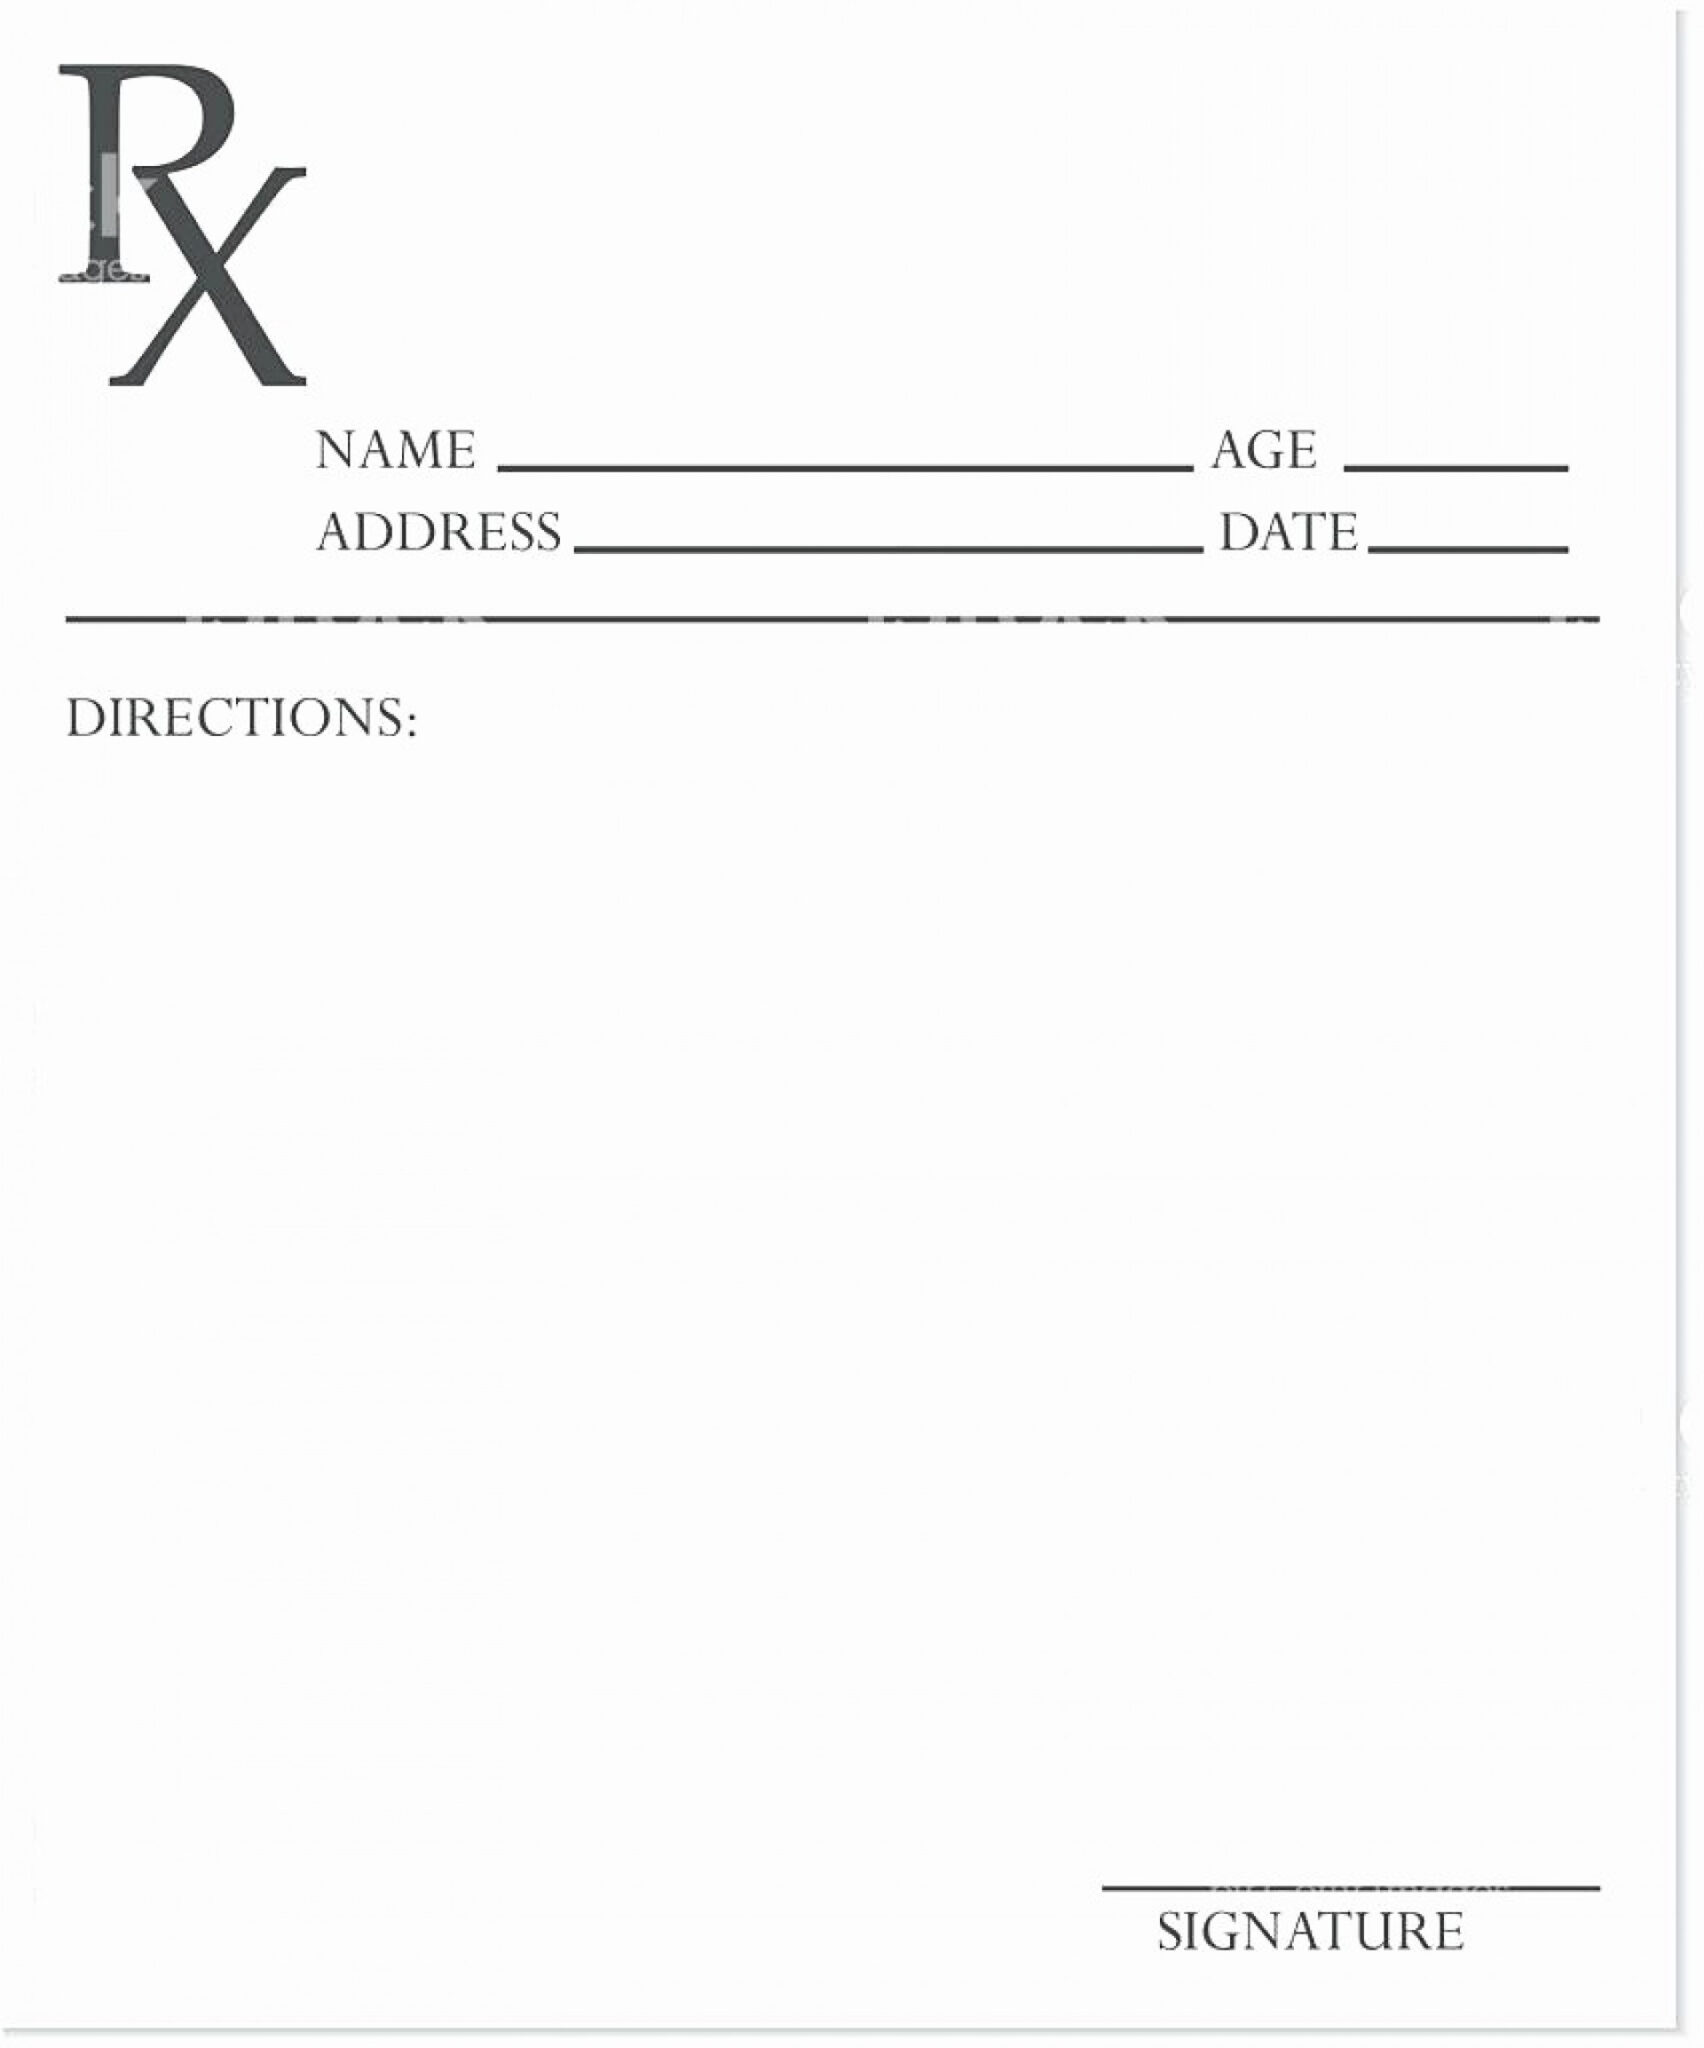 018 Inspirational Sample Prescription Pad Template Blank With Blank